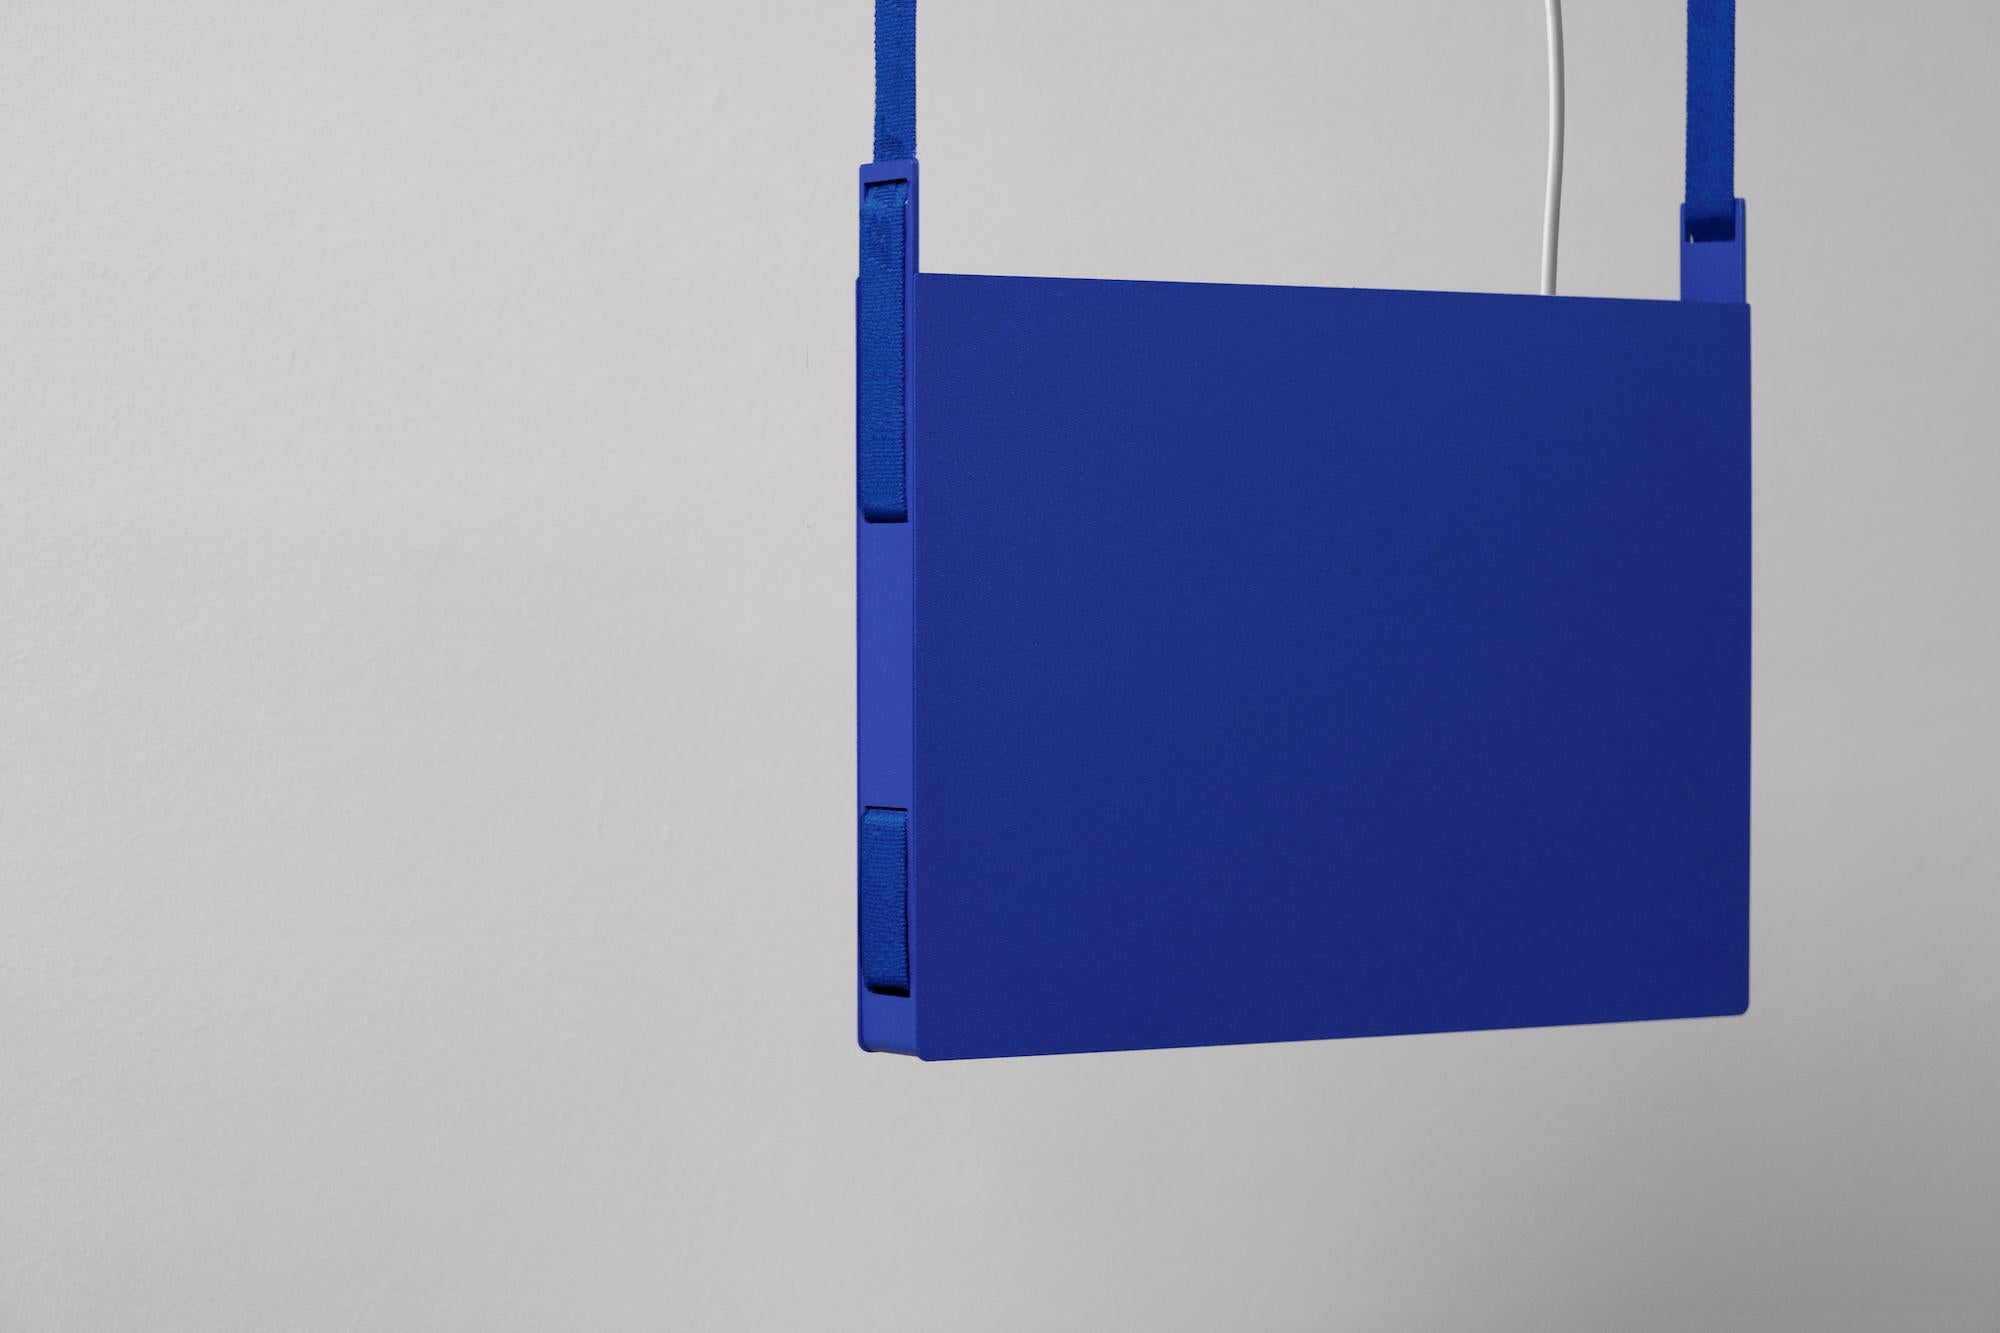 BLT_2 Ultra Blue Pendant Lamp by +kouple
Dimensions: D 33 x W 3,4 x H 27,7 cm. 
Materials: Powder-coated steel, aluminum and plastic.

Available in different color options. The rod length is 250 cm. Please contact us.

All our lamps can be wired